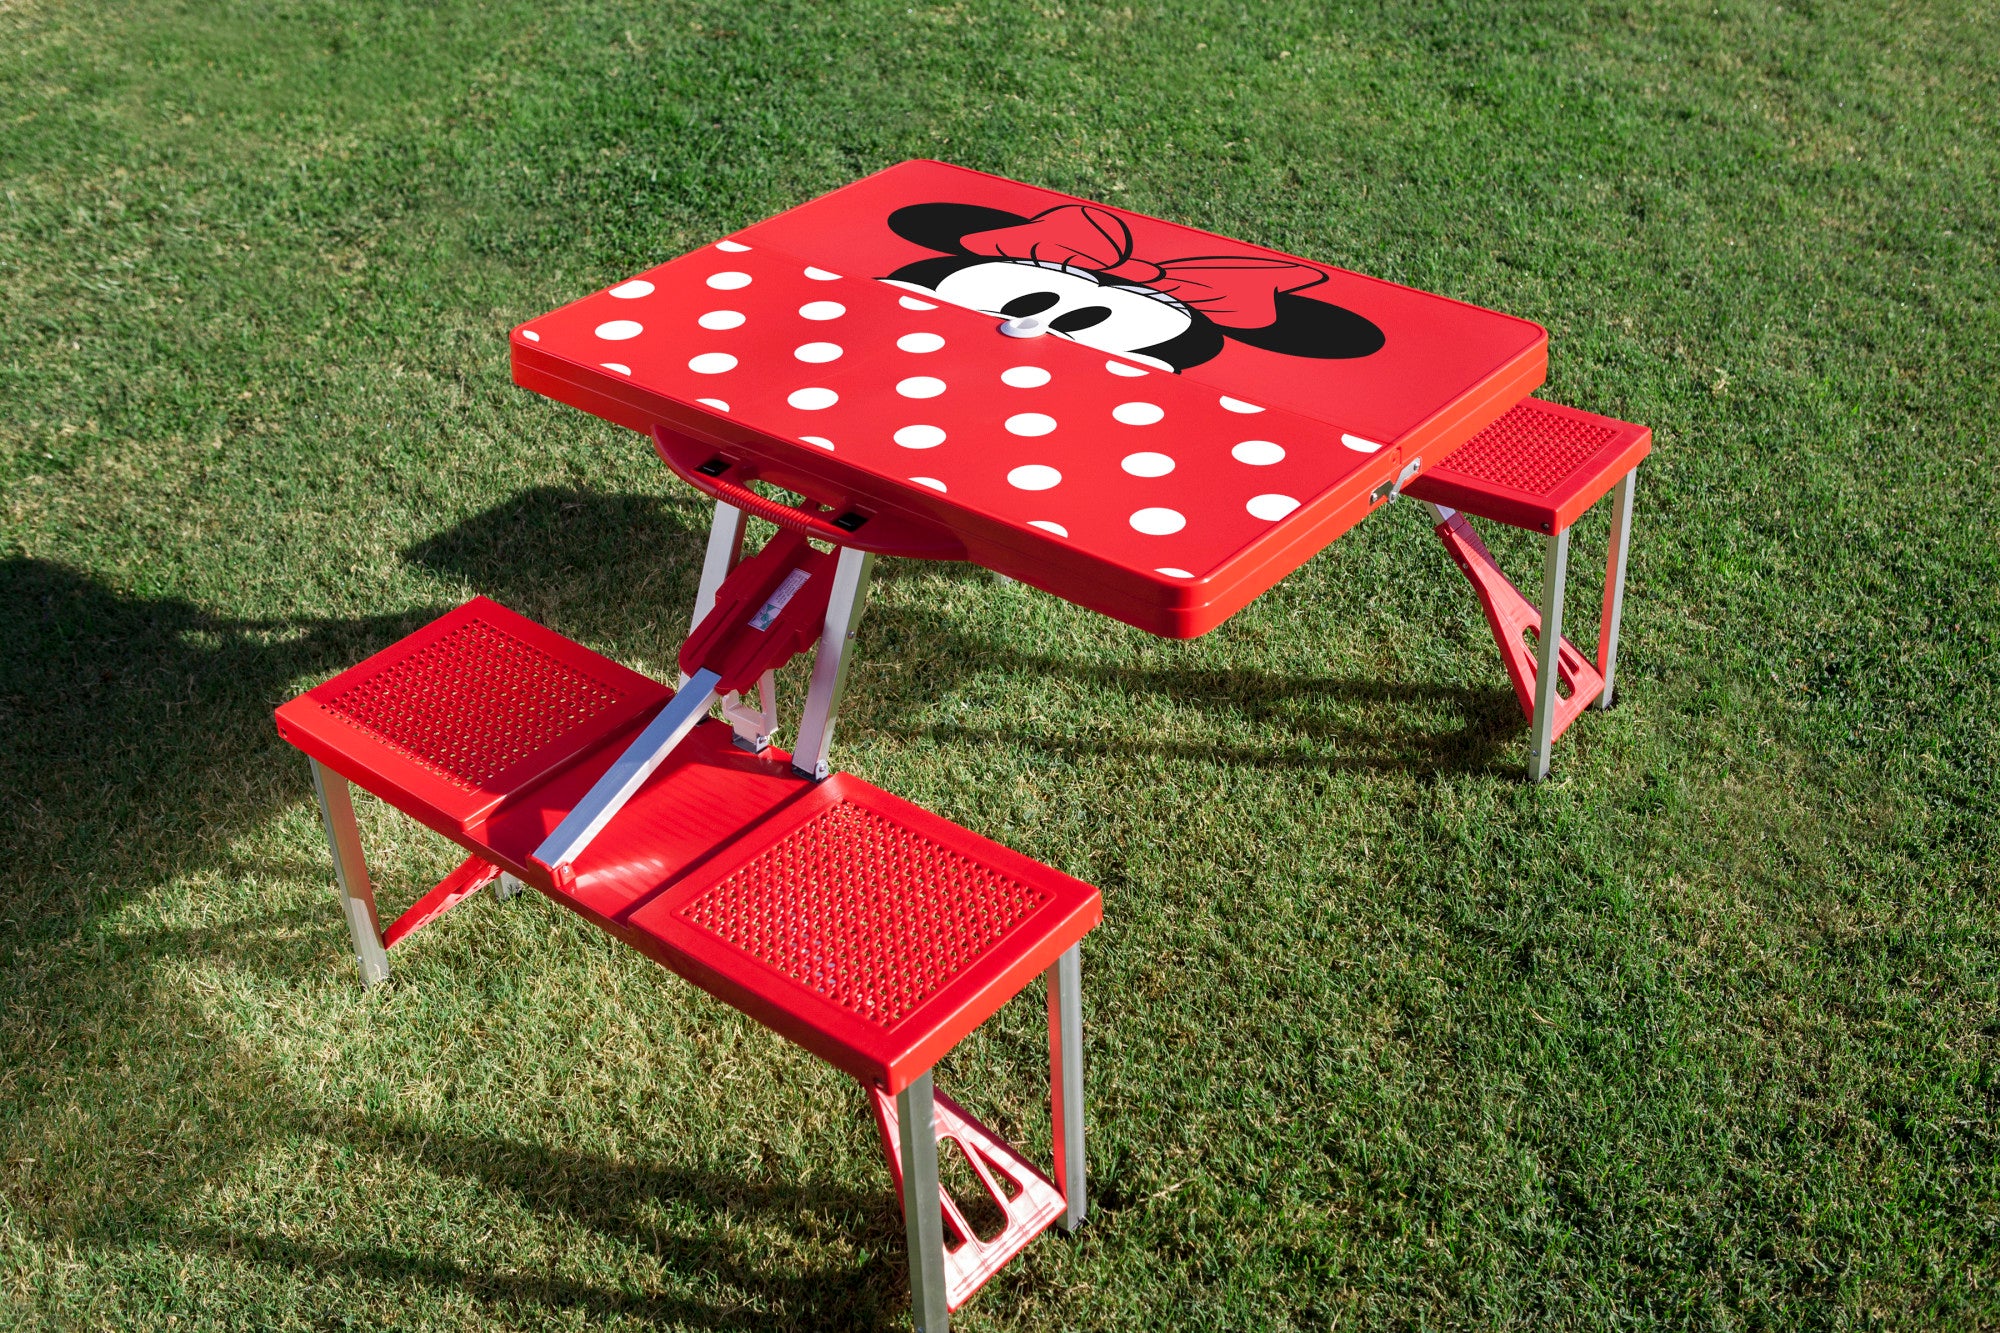 Minnie Mouse - Picnic Table Portable Folding Table with Seats